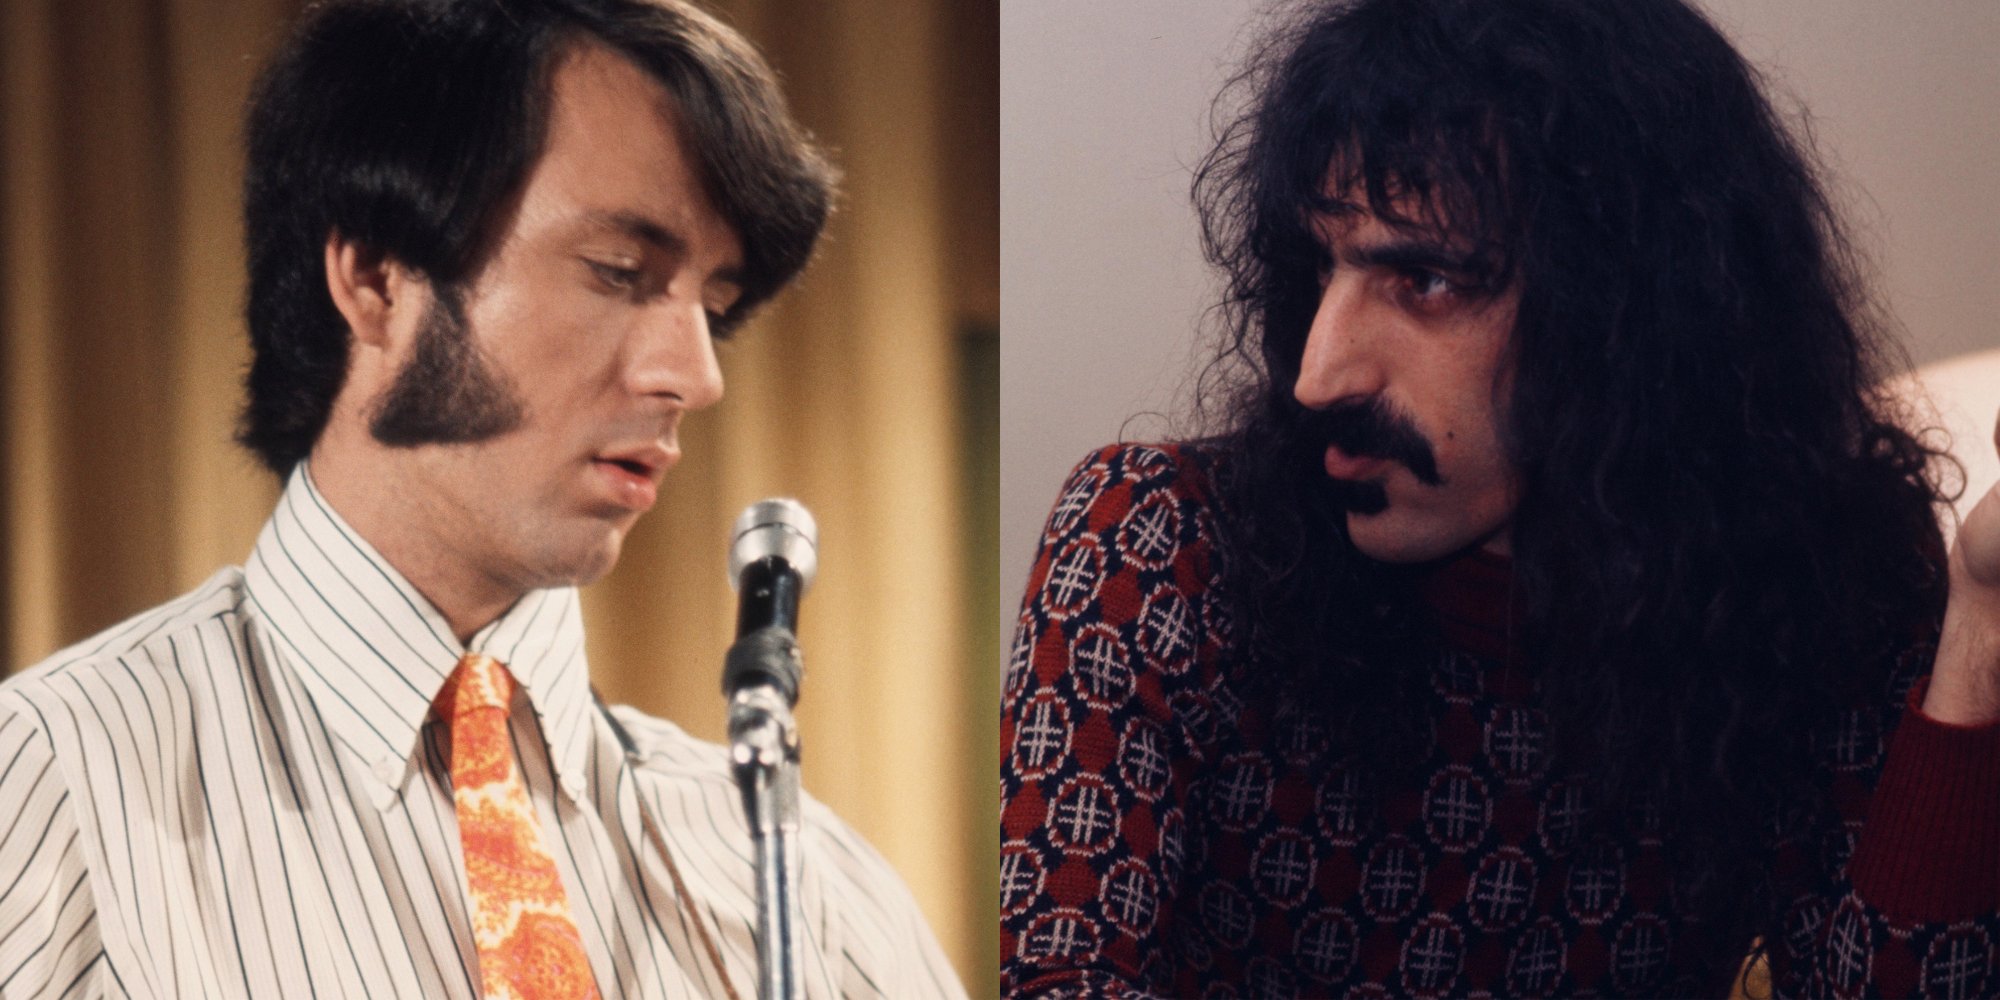 Mike Nesmith and Frank Zappa in two side-by-side photographs.